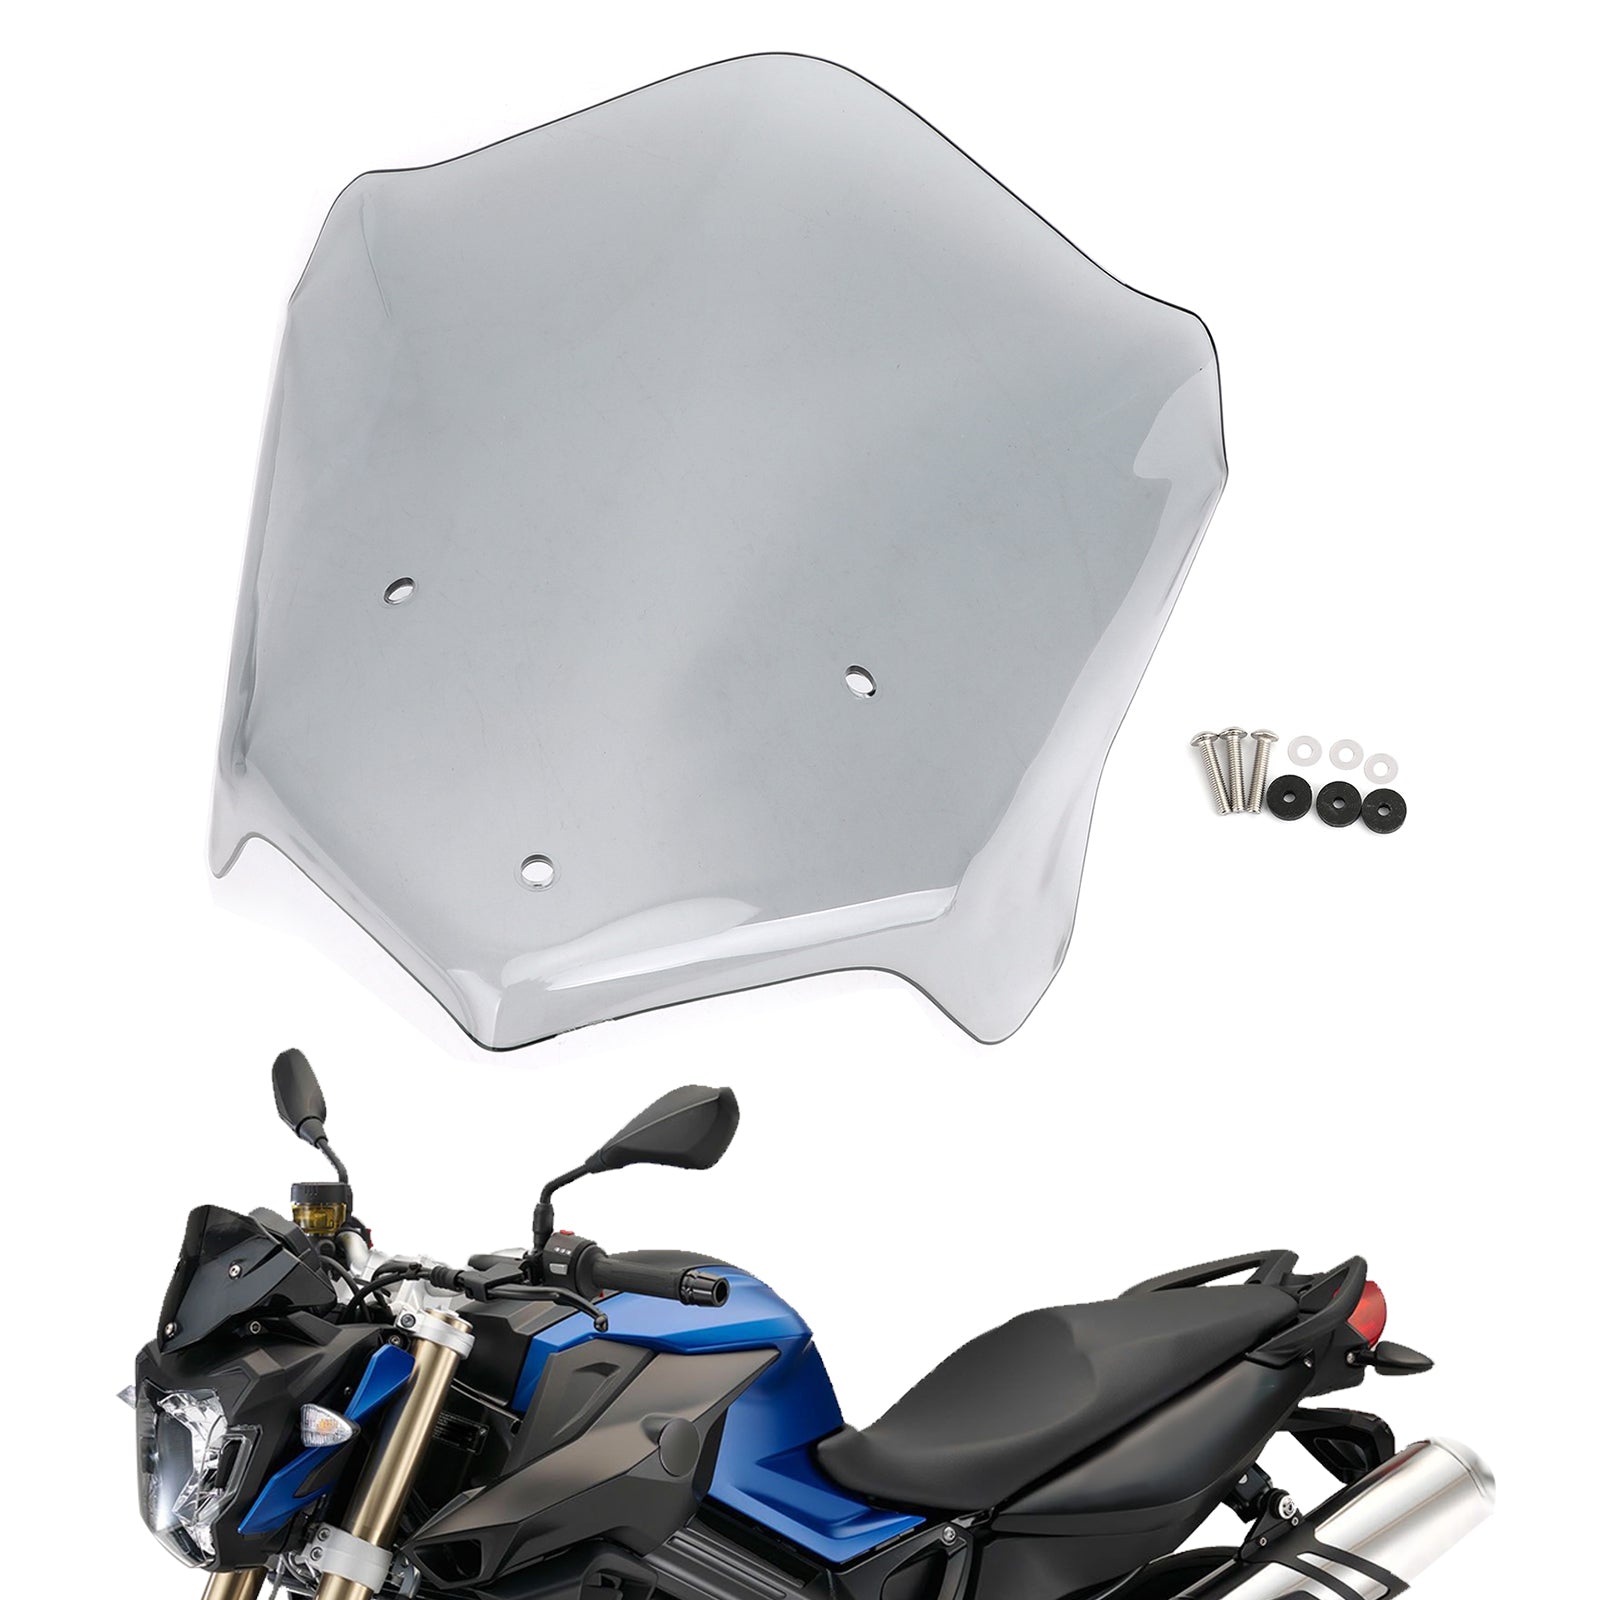 BMW ABS Plastic Motorcycle Windshield WindScreen Fit For BMW F800R 2015-2020